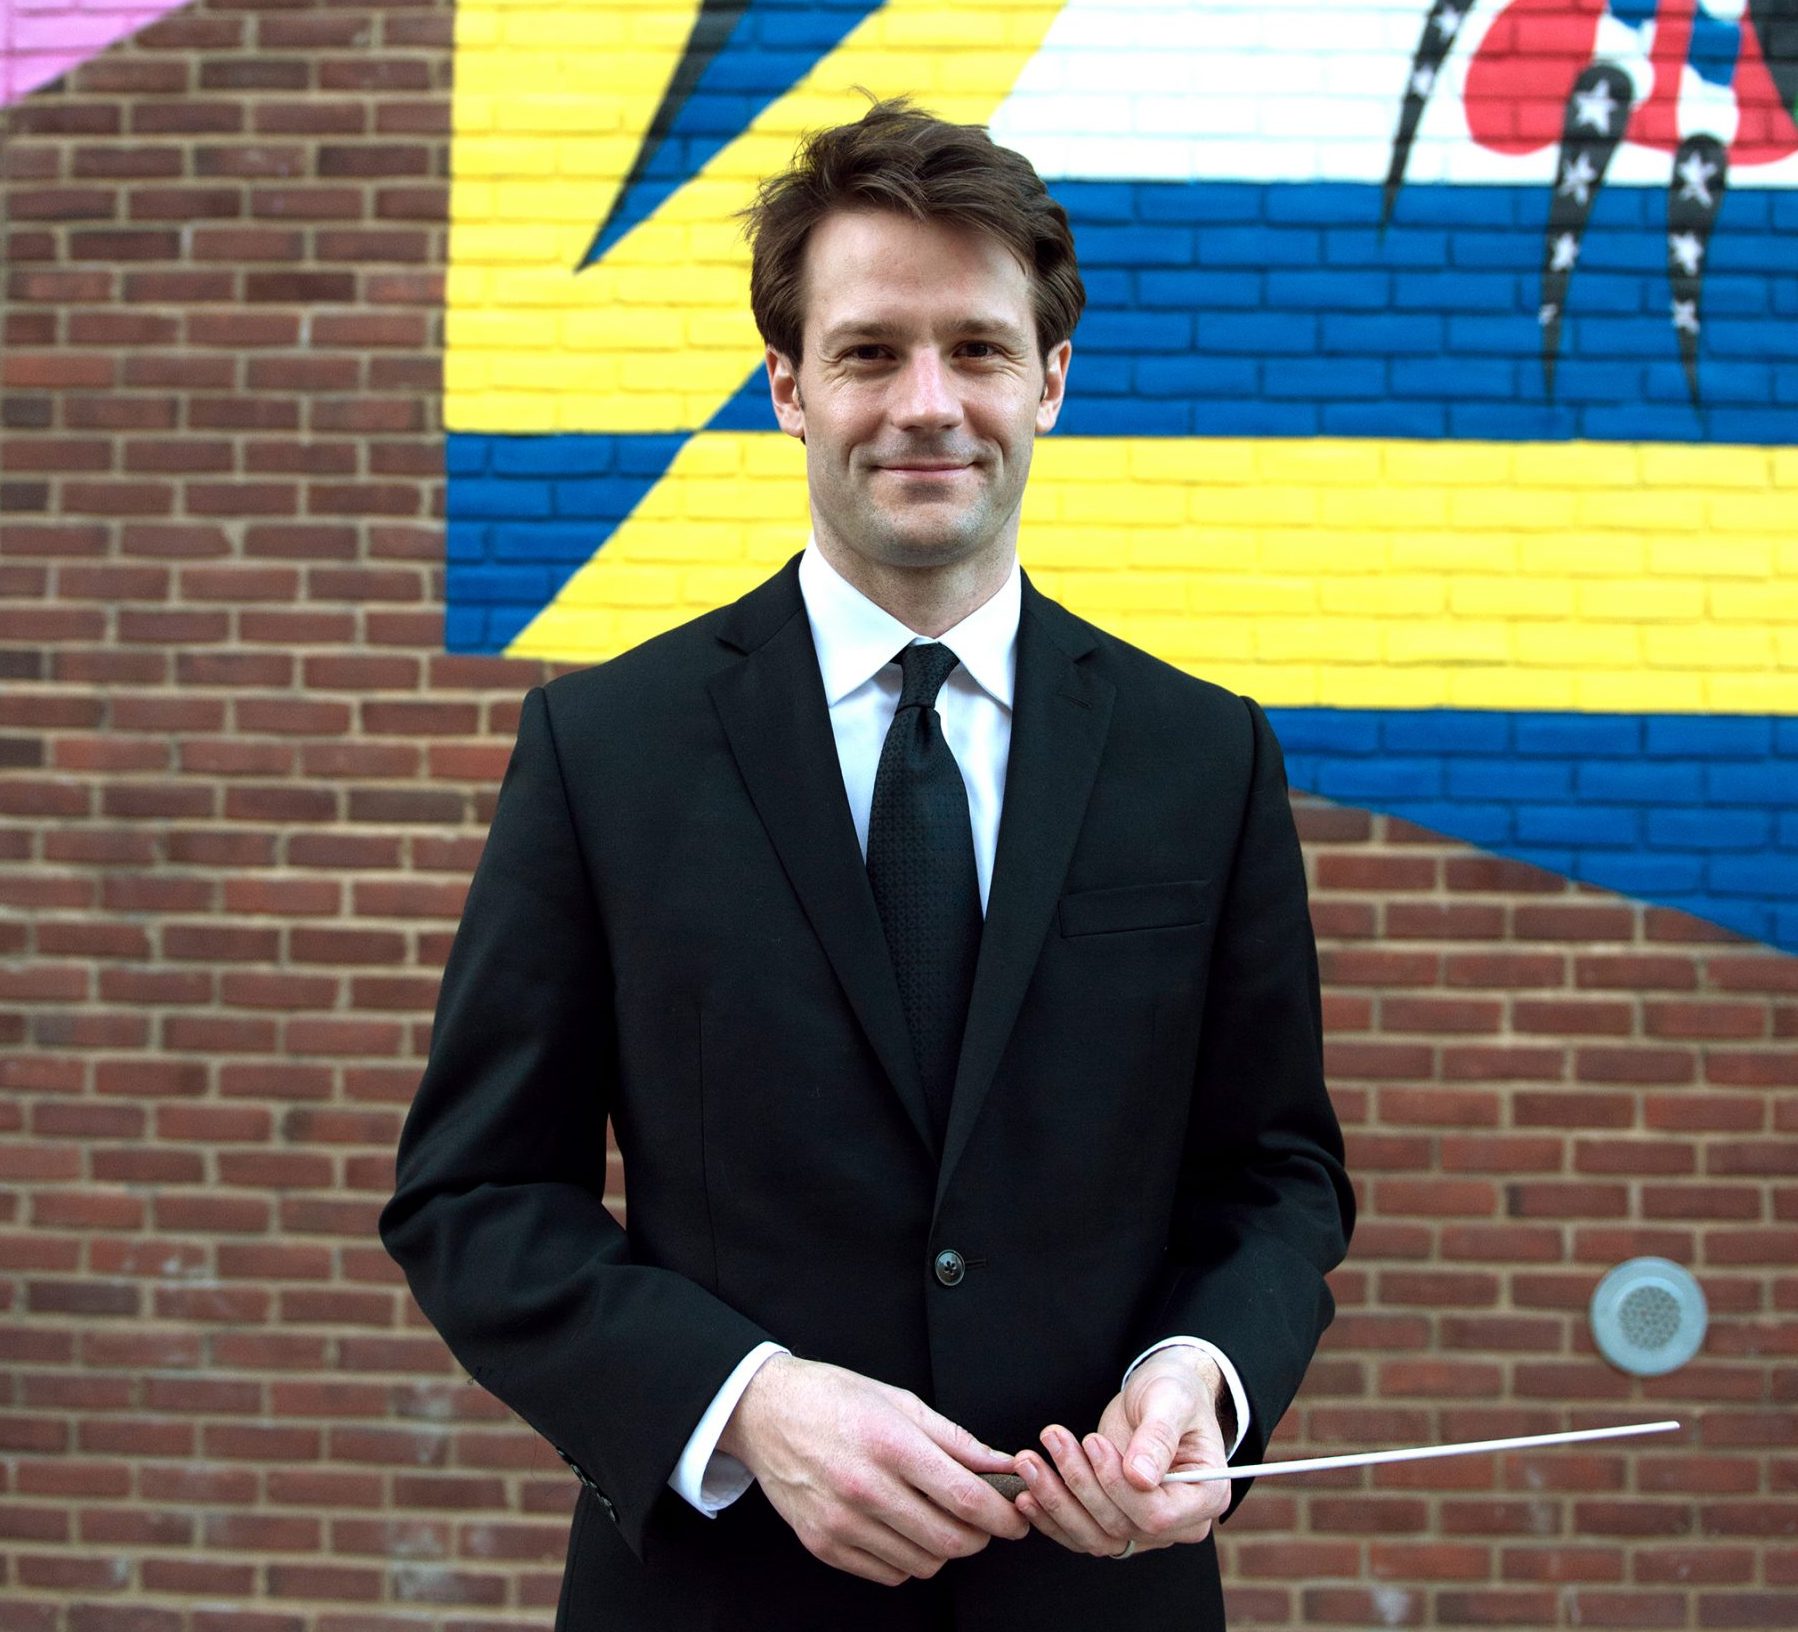 James is wearing a black suit with a white shirt and black tie. He is standing facing the camera, smiling, and is holding a conducting baton between his hands. He is in front of a multi-colored painting on a brick wall.